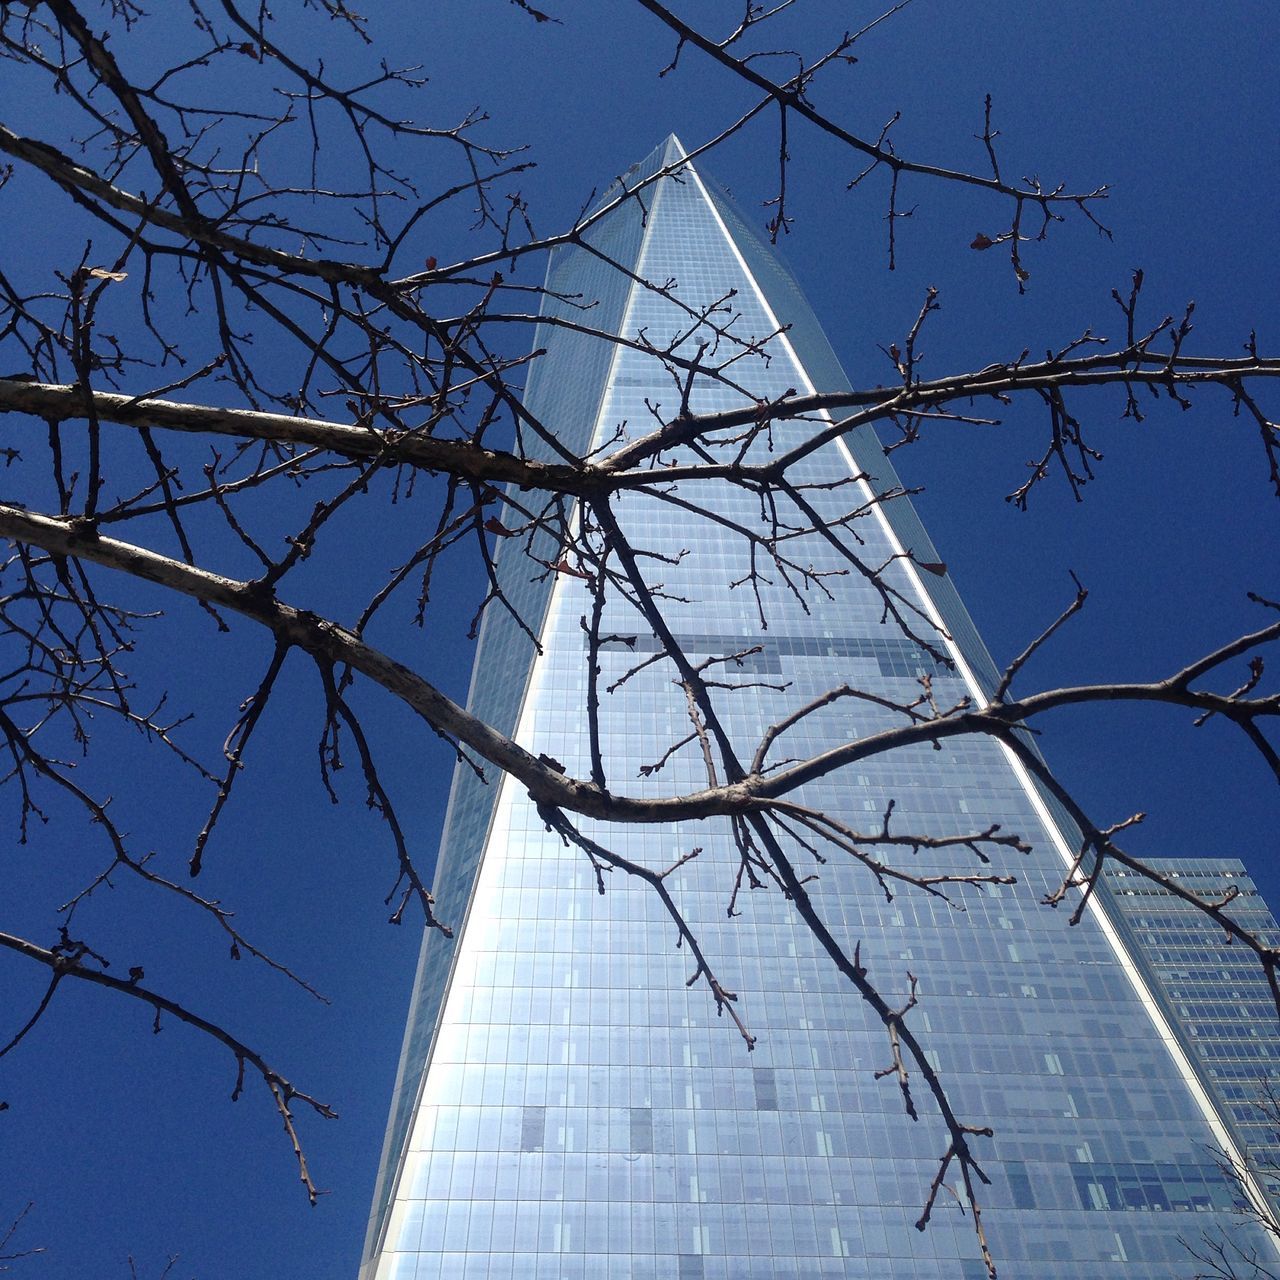 architecture, built structure, low angle view, building exterior, blue, bare tree, city, clear sky, modern, sky, building, office building, glass - material, day, tower, tall - high, outdoors, no people, skyscraper, sunlight